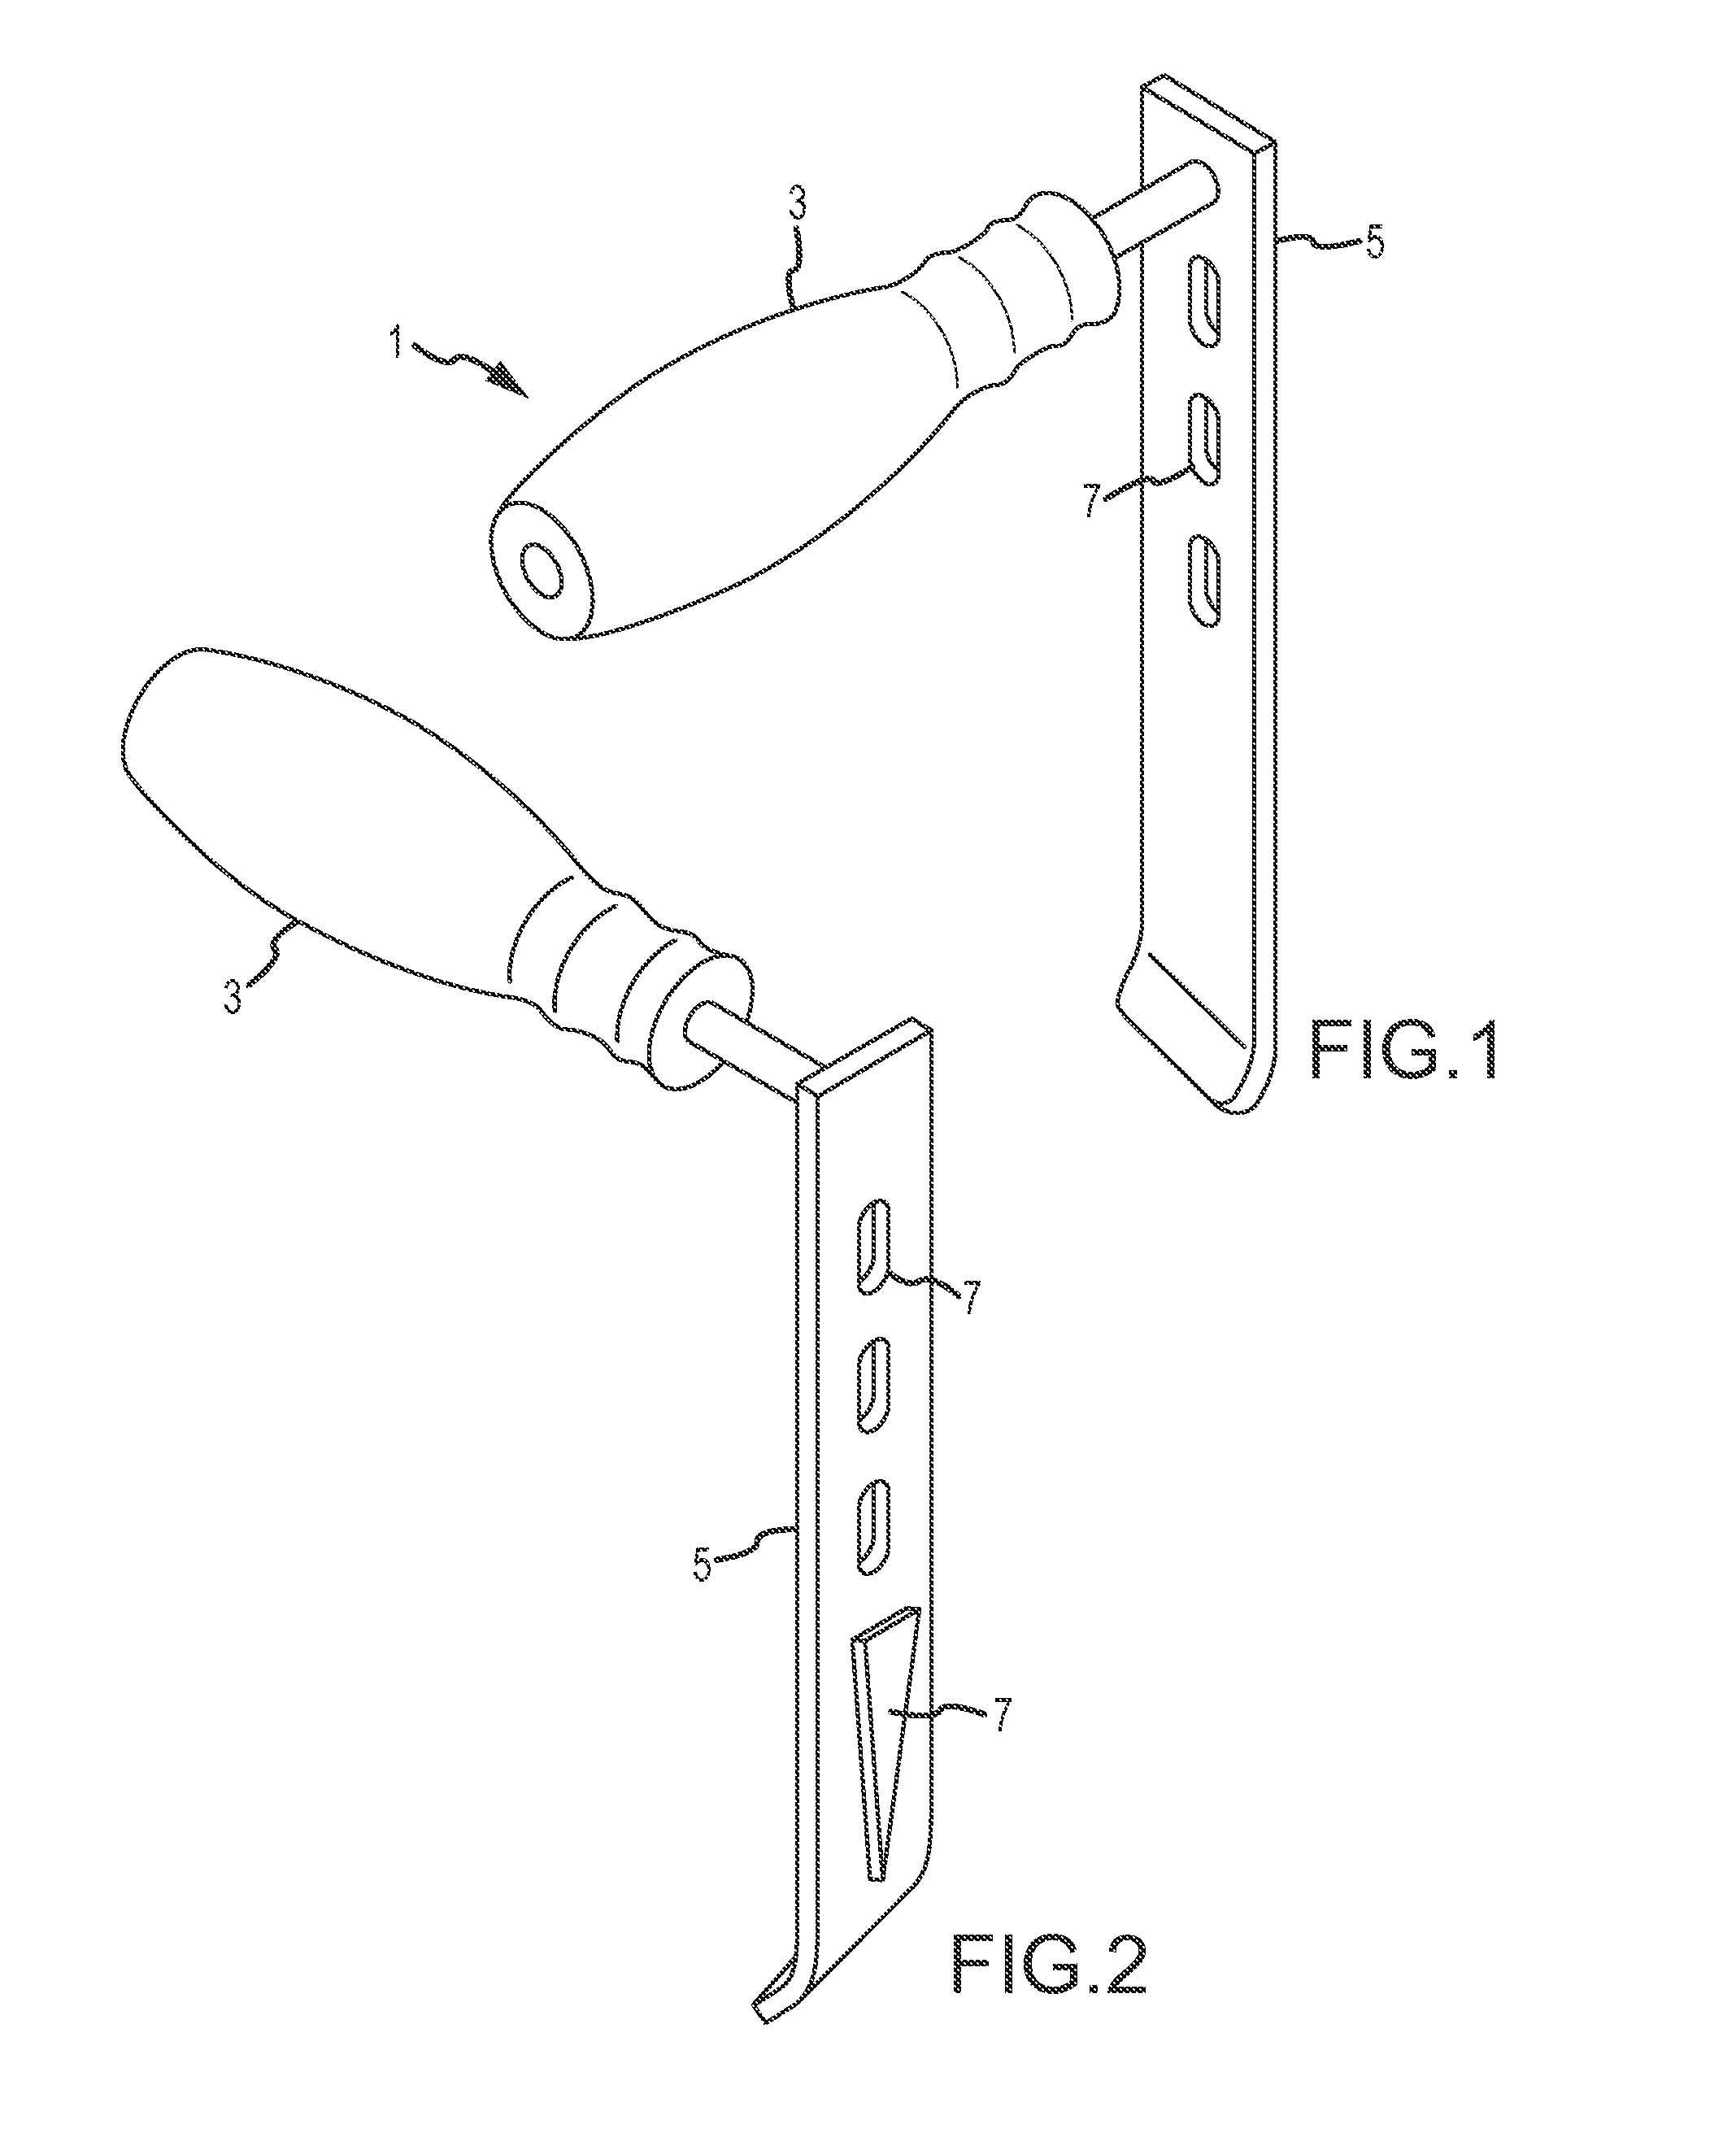 Method and Apparatus for Performing Retro Peritoneal Dissection